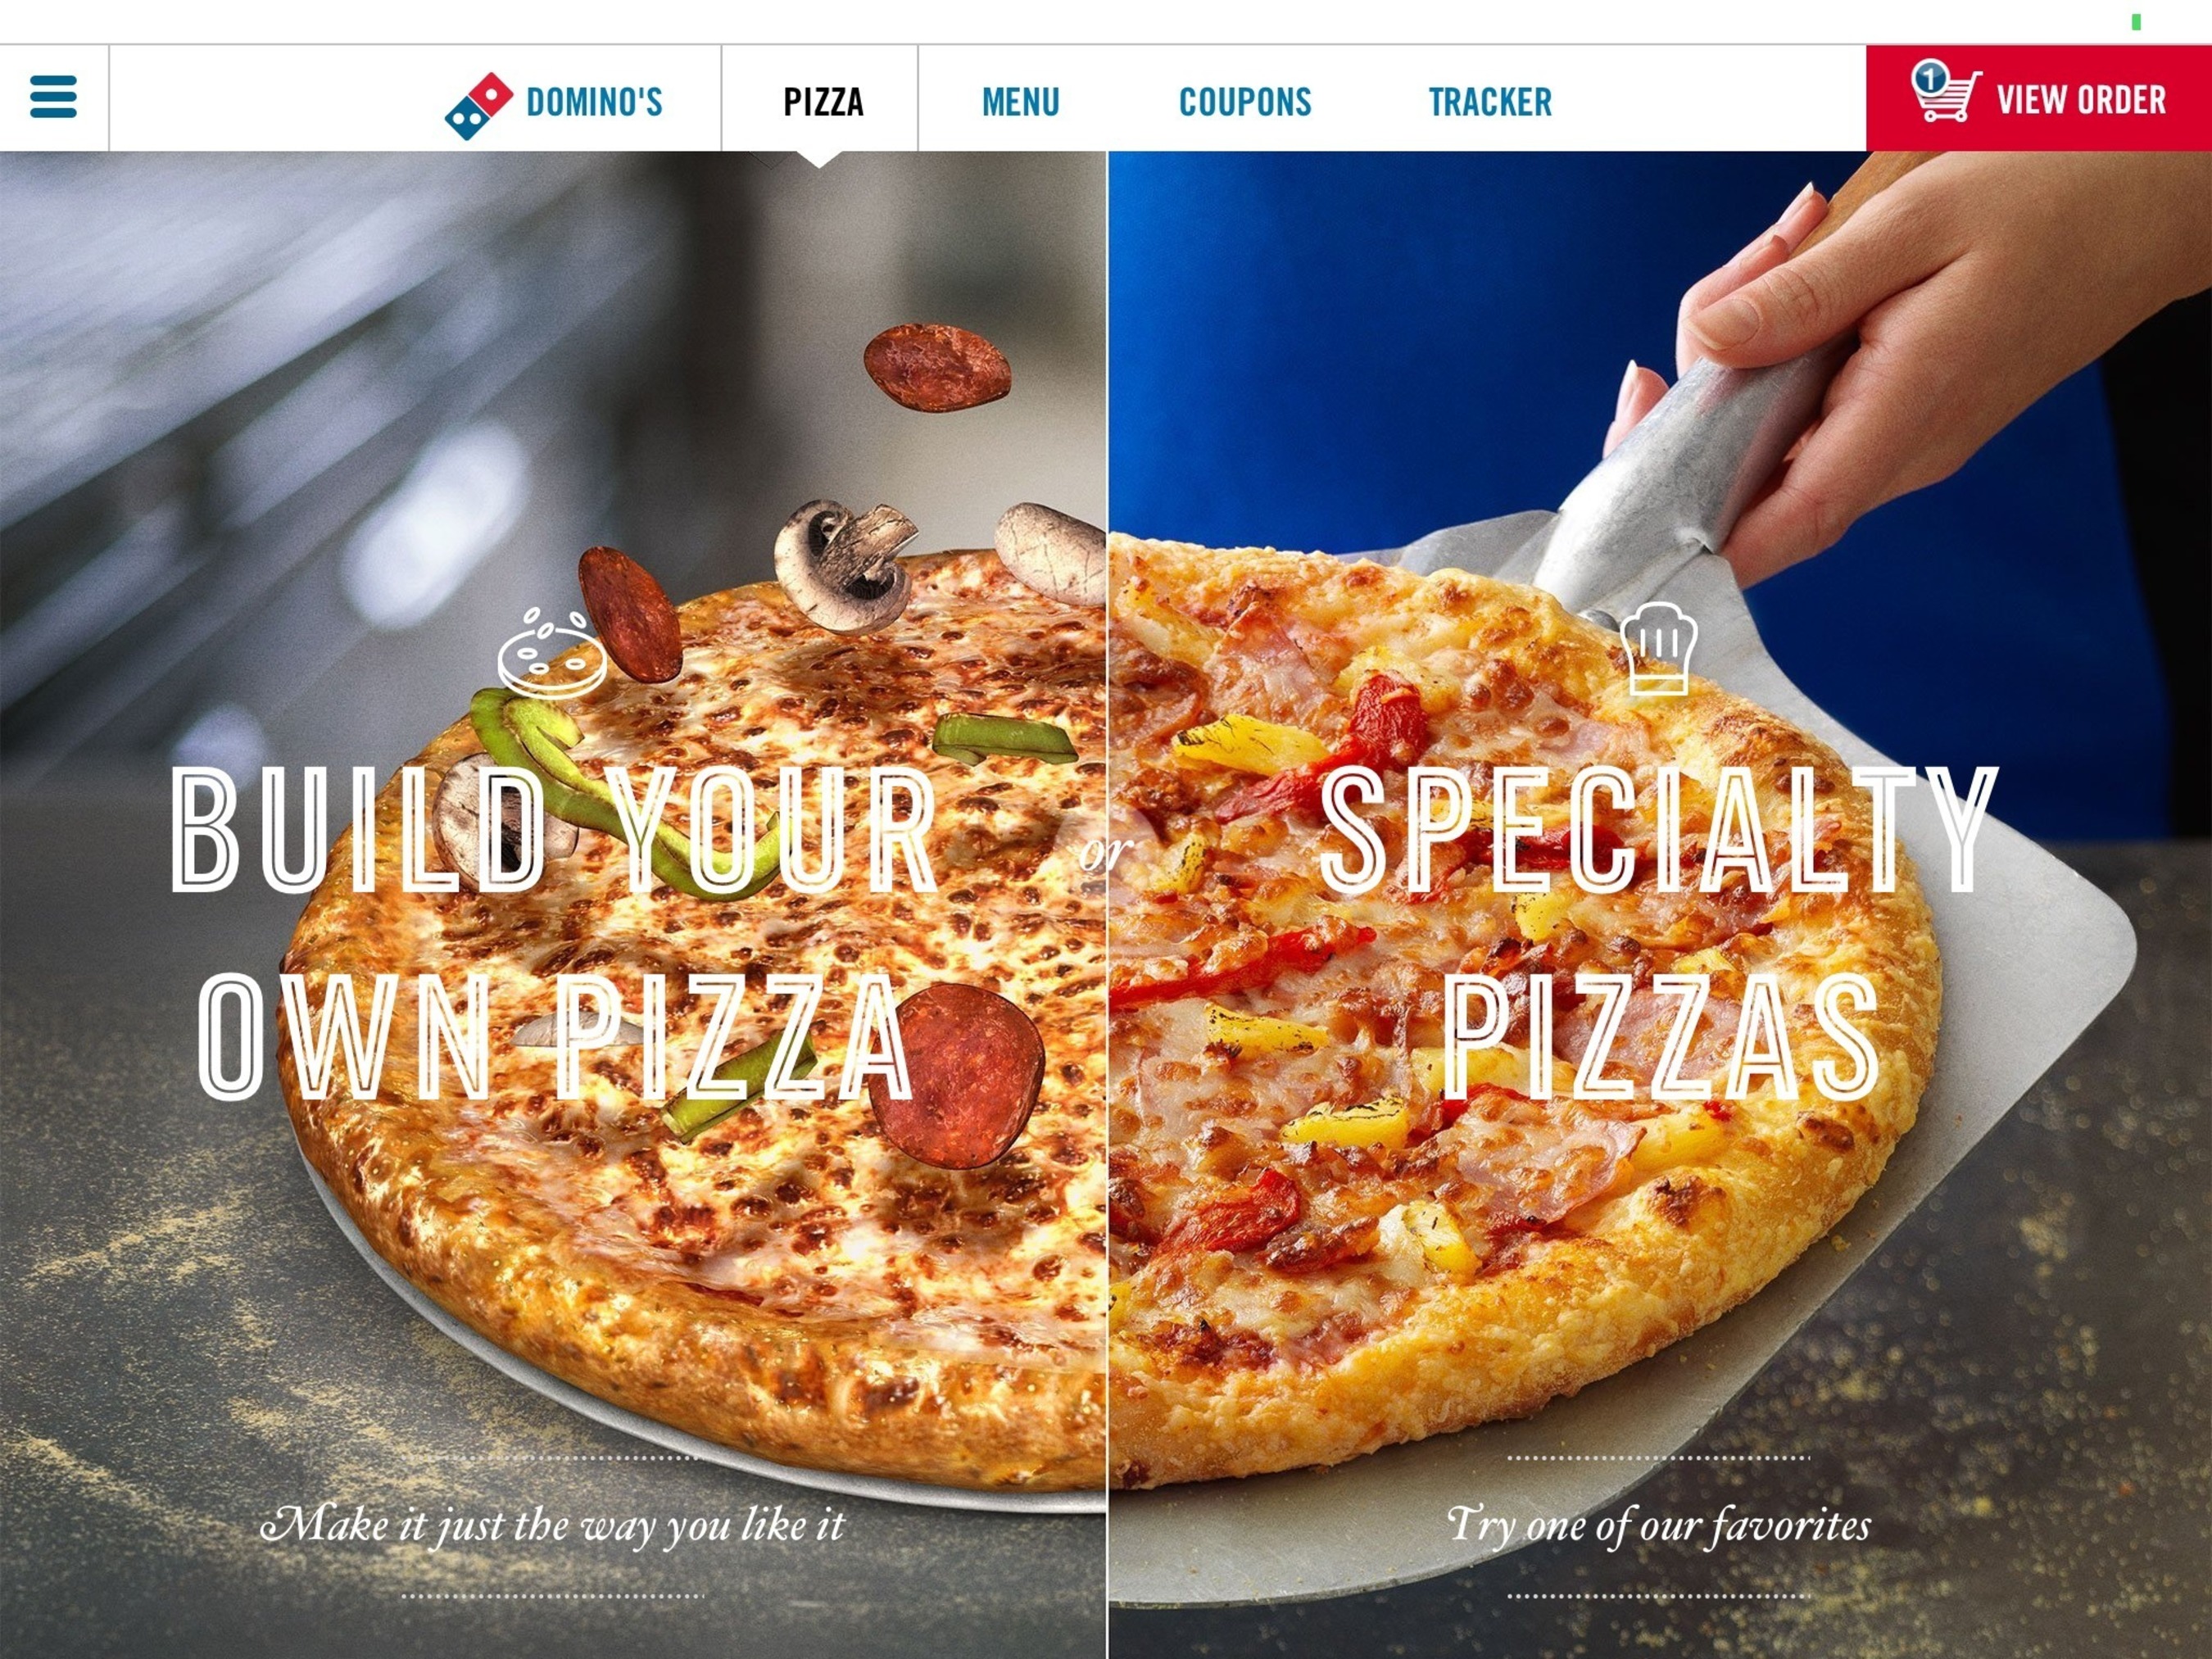 Domino's today launches its most beautiful ordering app yet, for iPad. (PRNewsFoto/Domino's Pizza) (PRNewsFoto/Domino's Pizza)